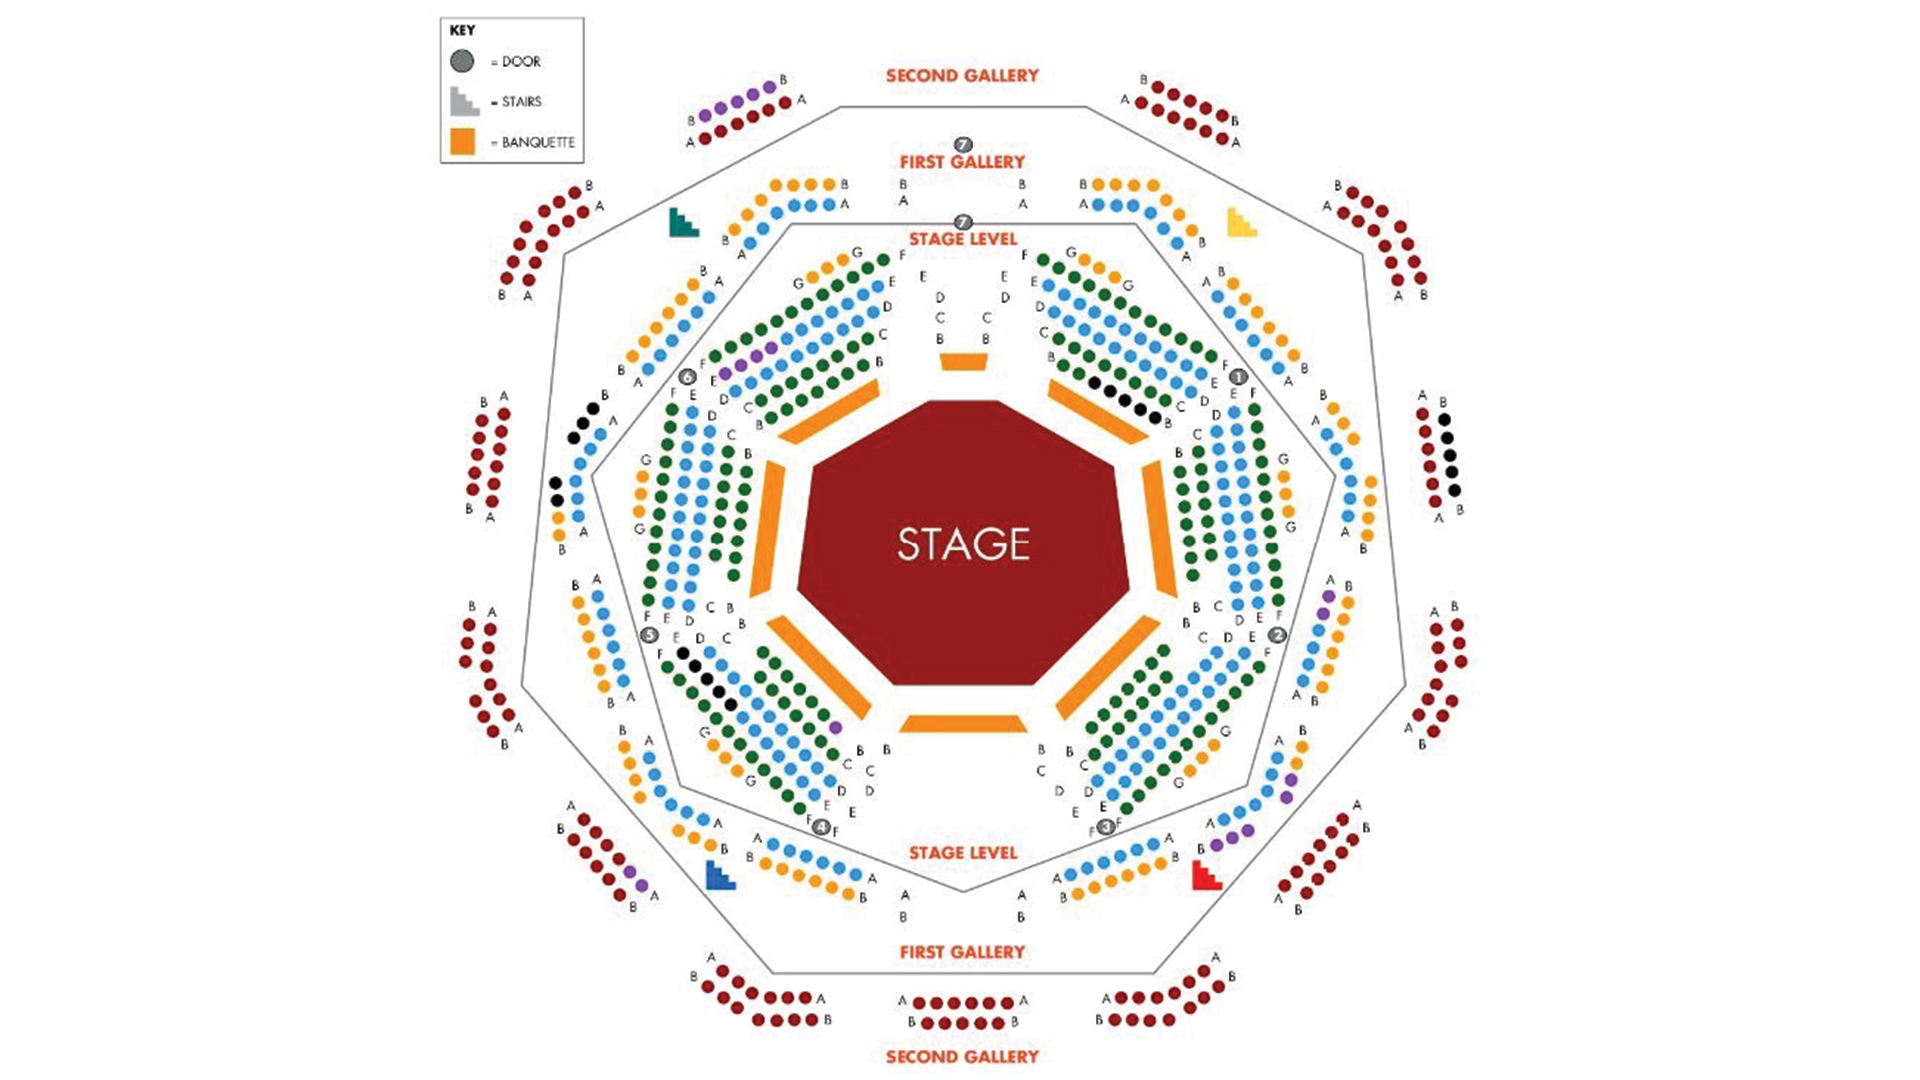 Seating plan of the Royal Exchange Theatre. Each sit is represented by a coloured dot depending on the pricing band. The seats are in the round and on 3 levels.